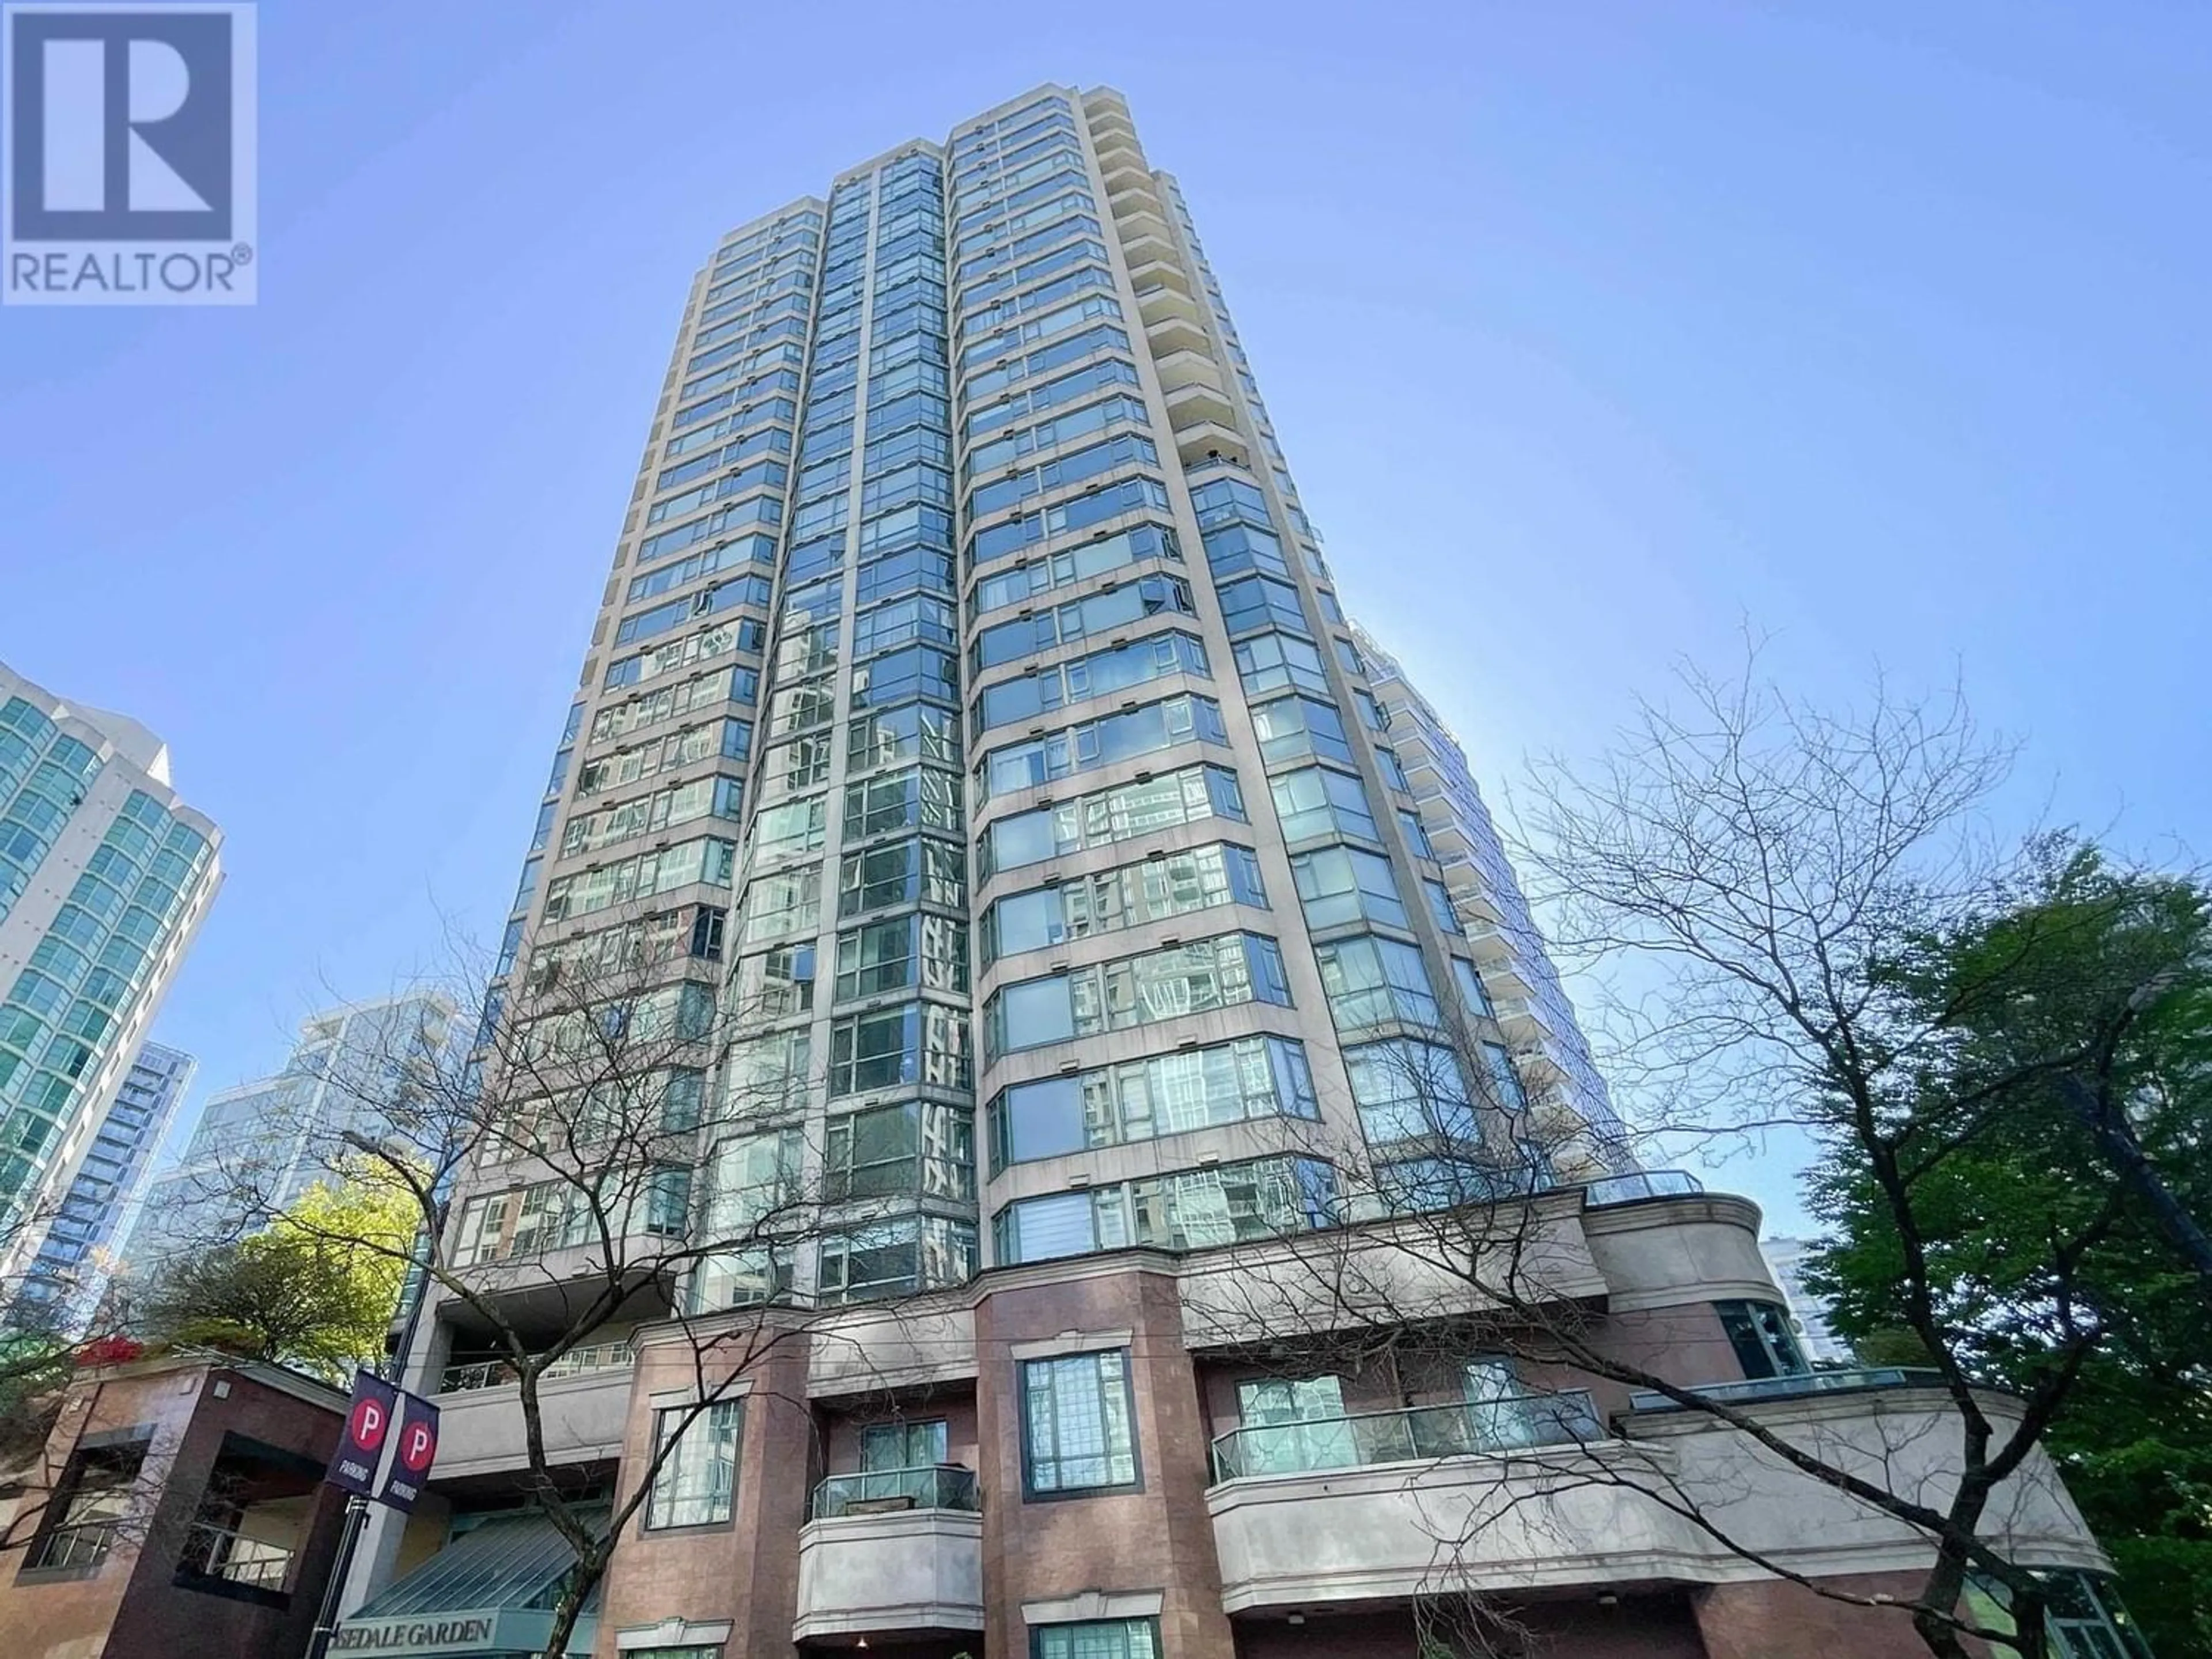 A pic from exterior of the house or condo for 1605 888 HAMILTON STREET, Vancouver British Columbia V6B5W4